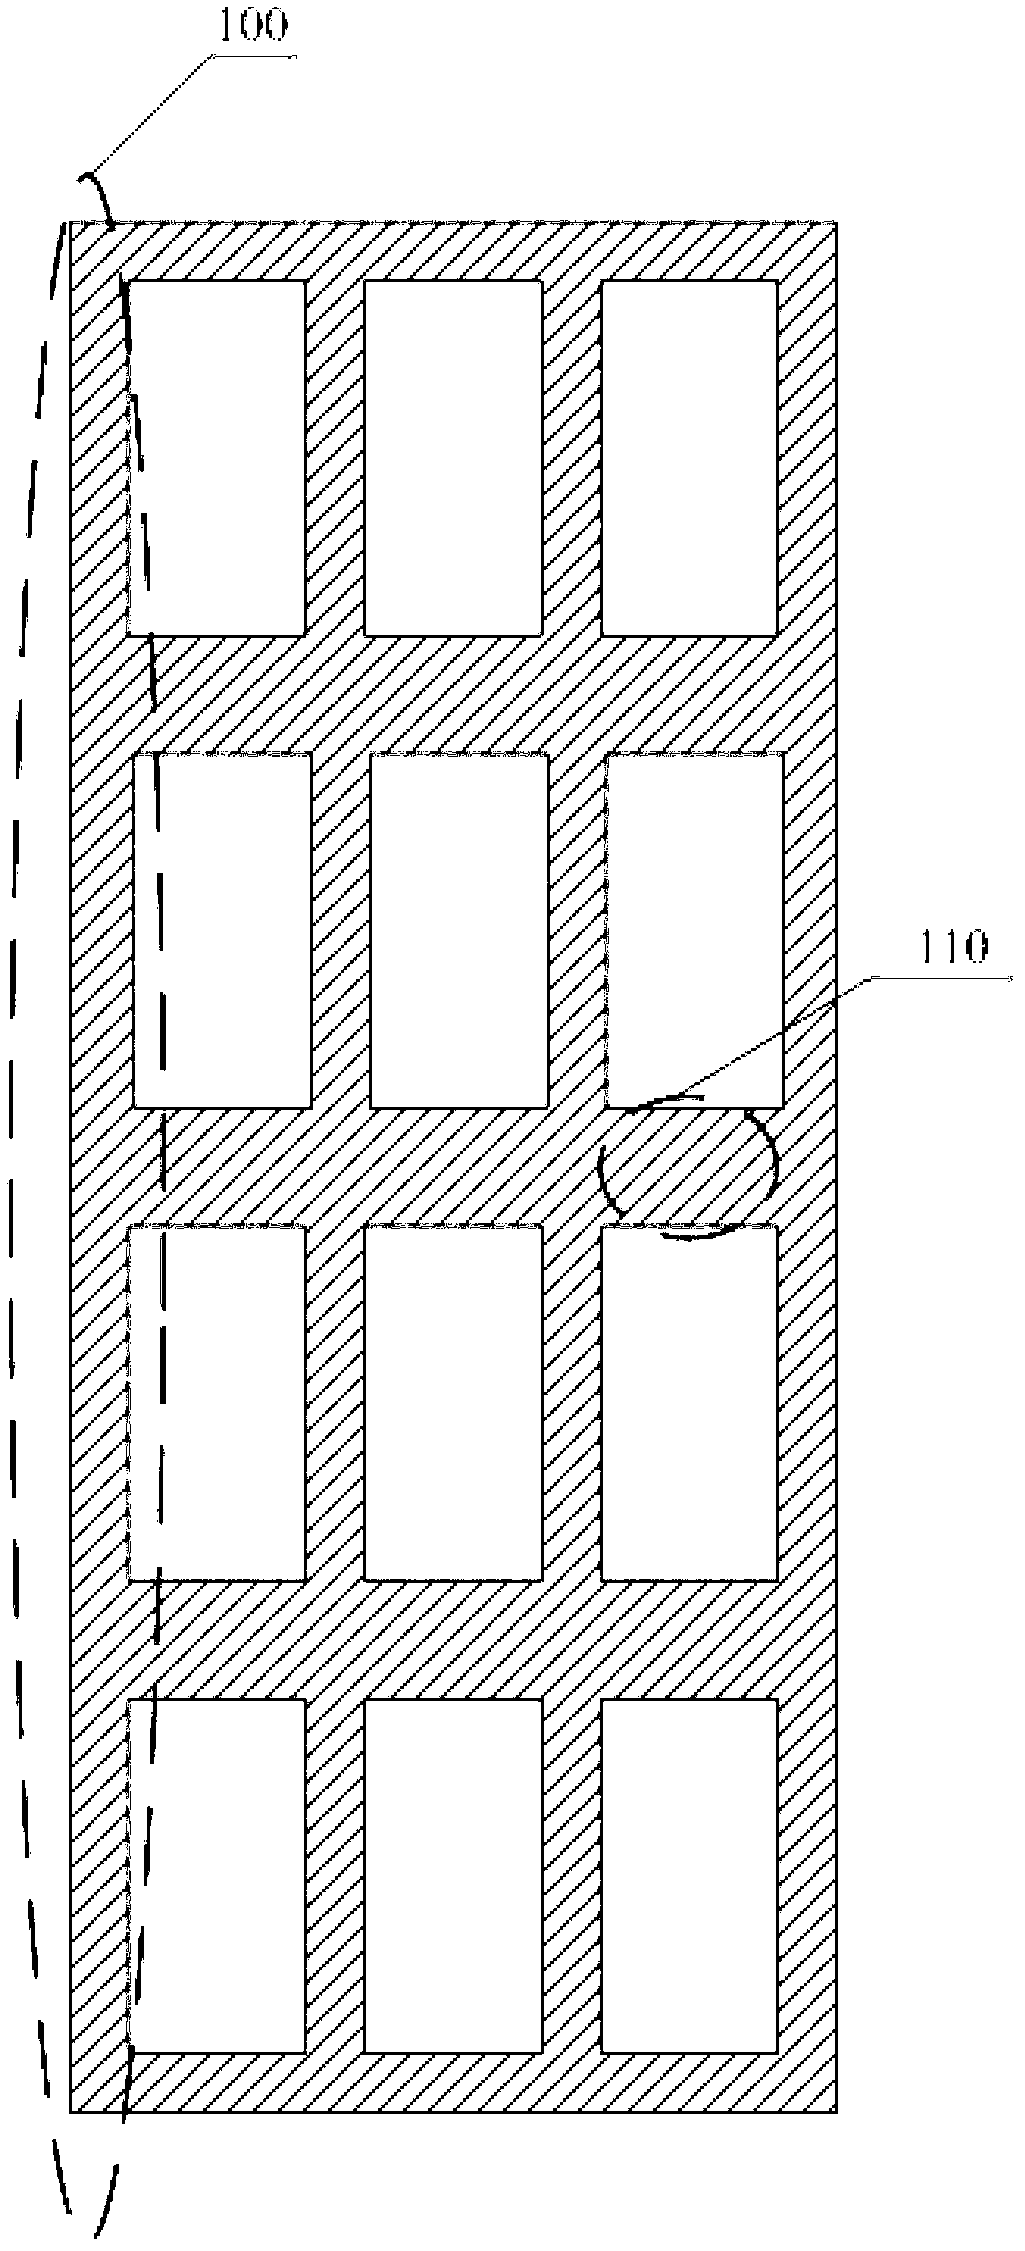 In-cell touch panel and display device